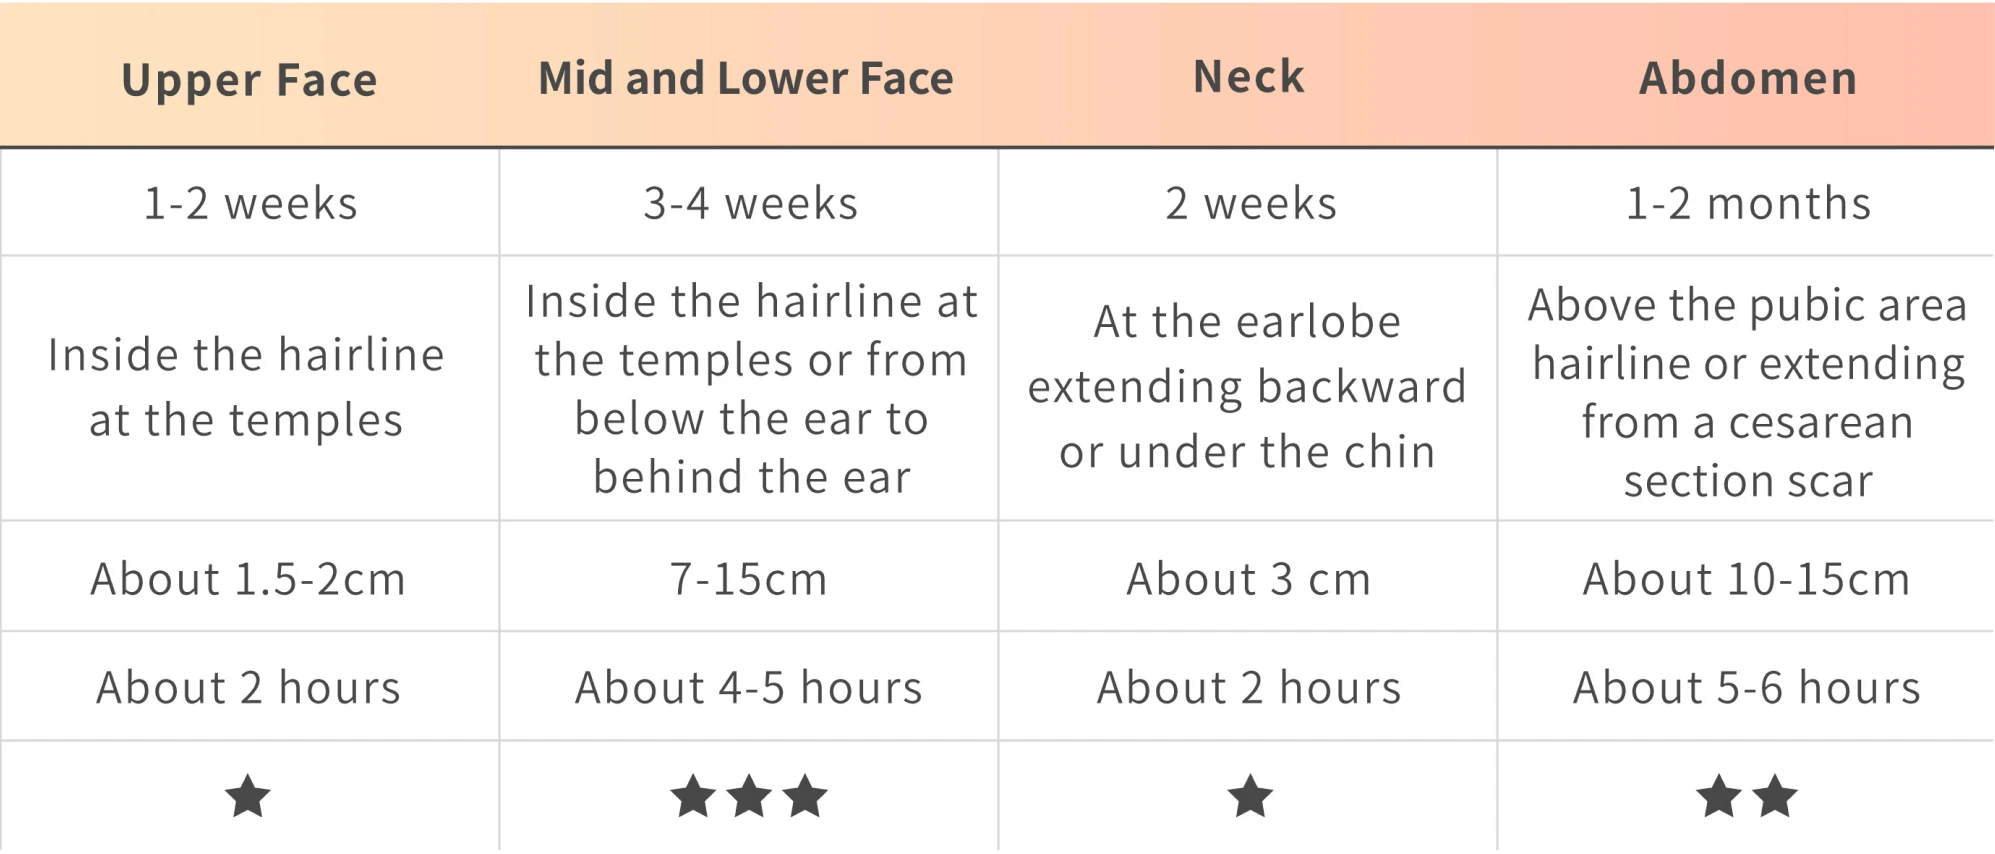 Facelift Surgery Comparison Table - Upper Face, Mid and Lower Face, Neck, Abdomen